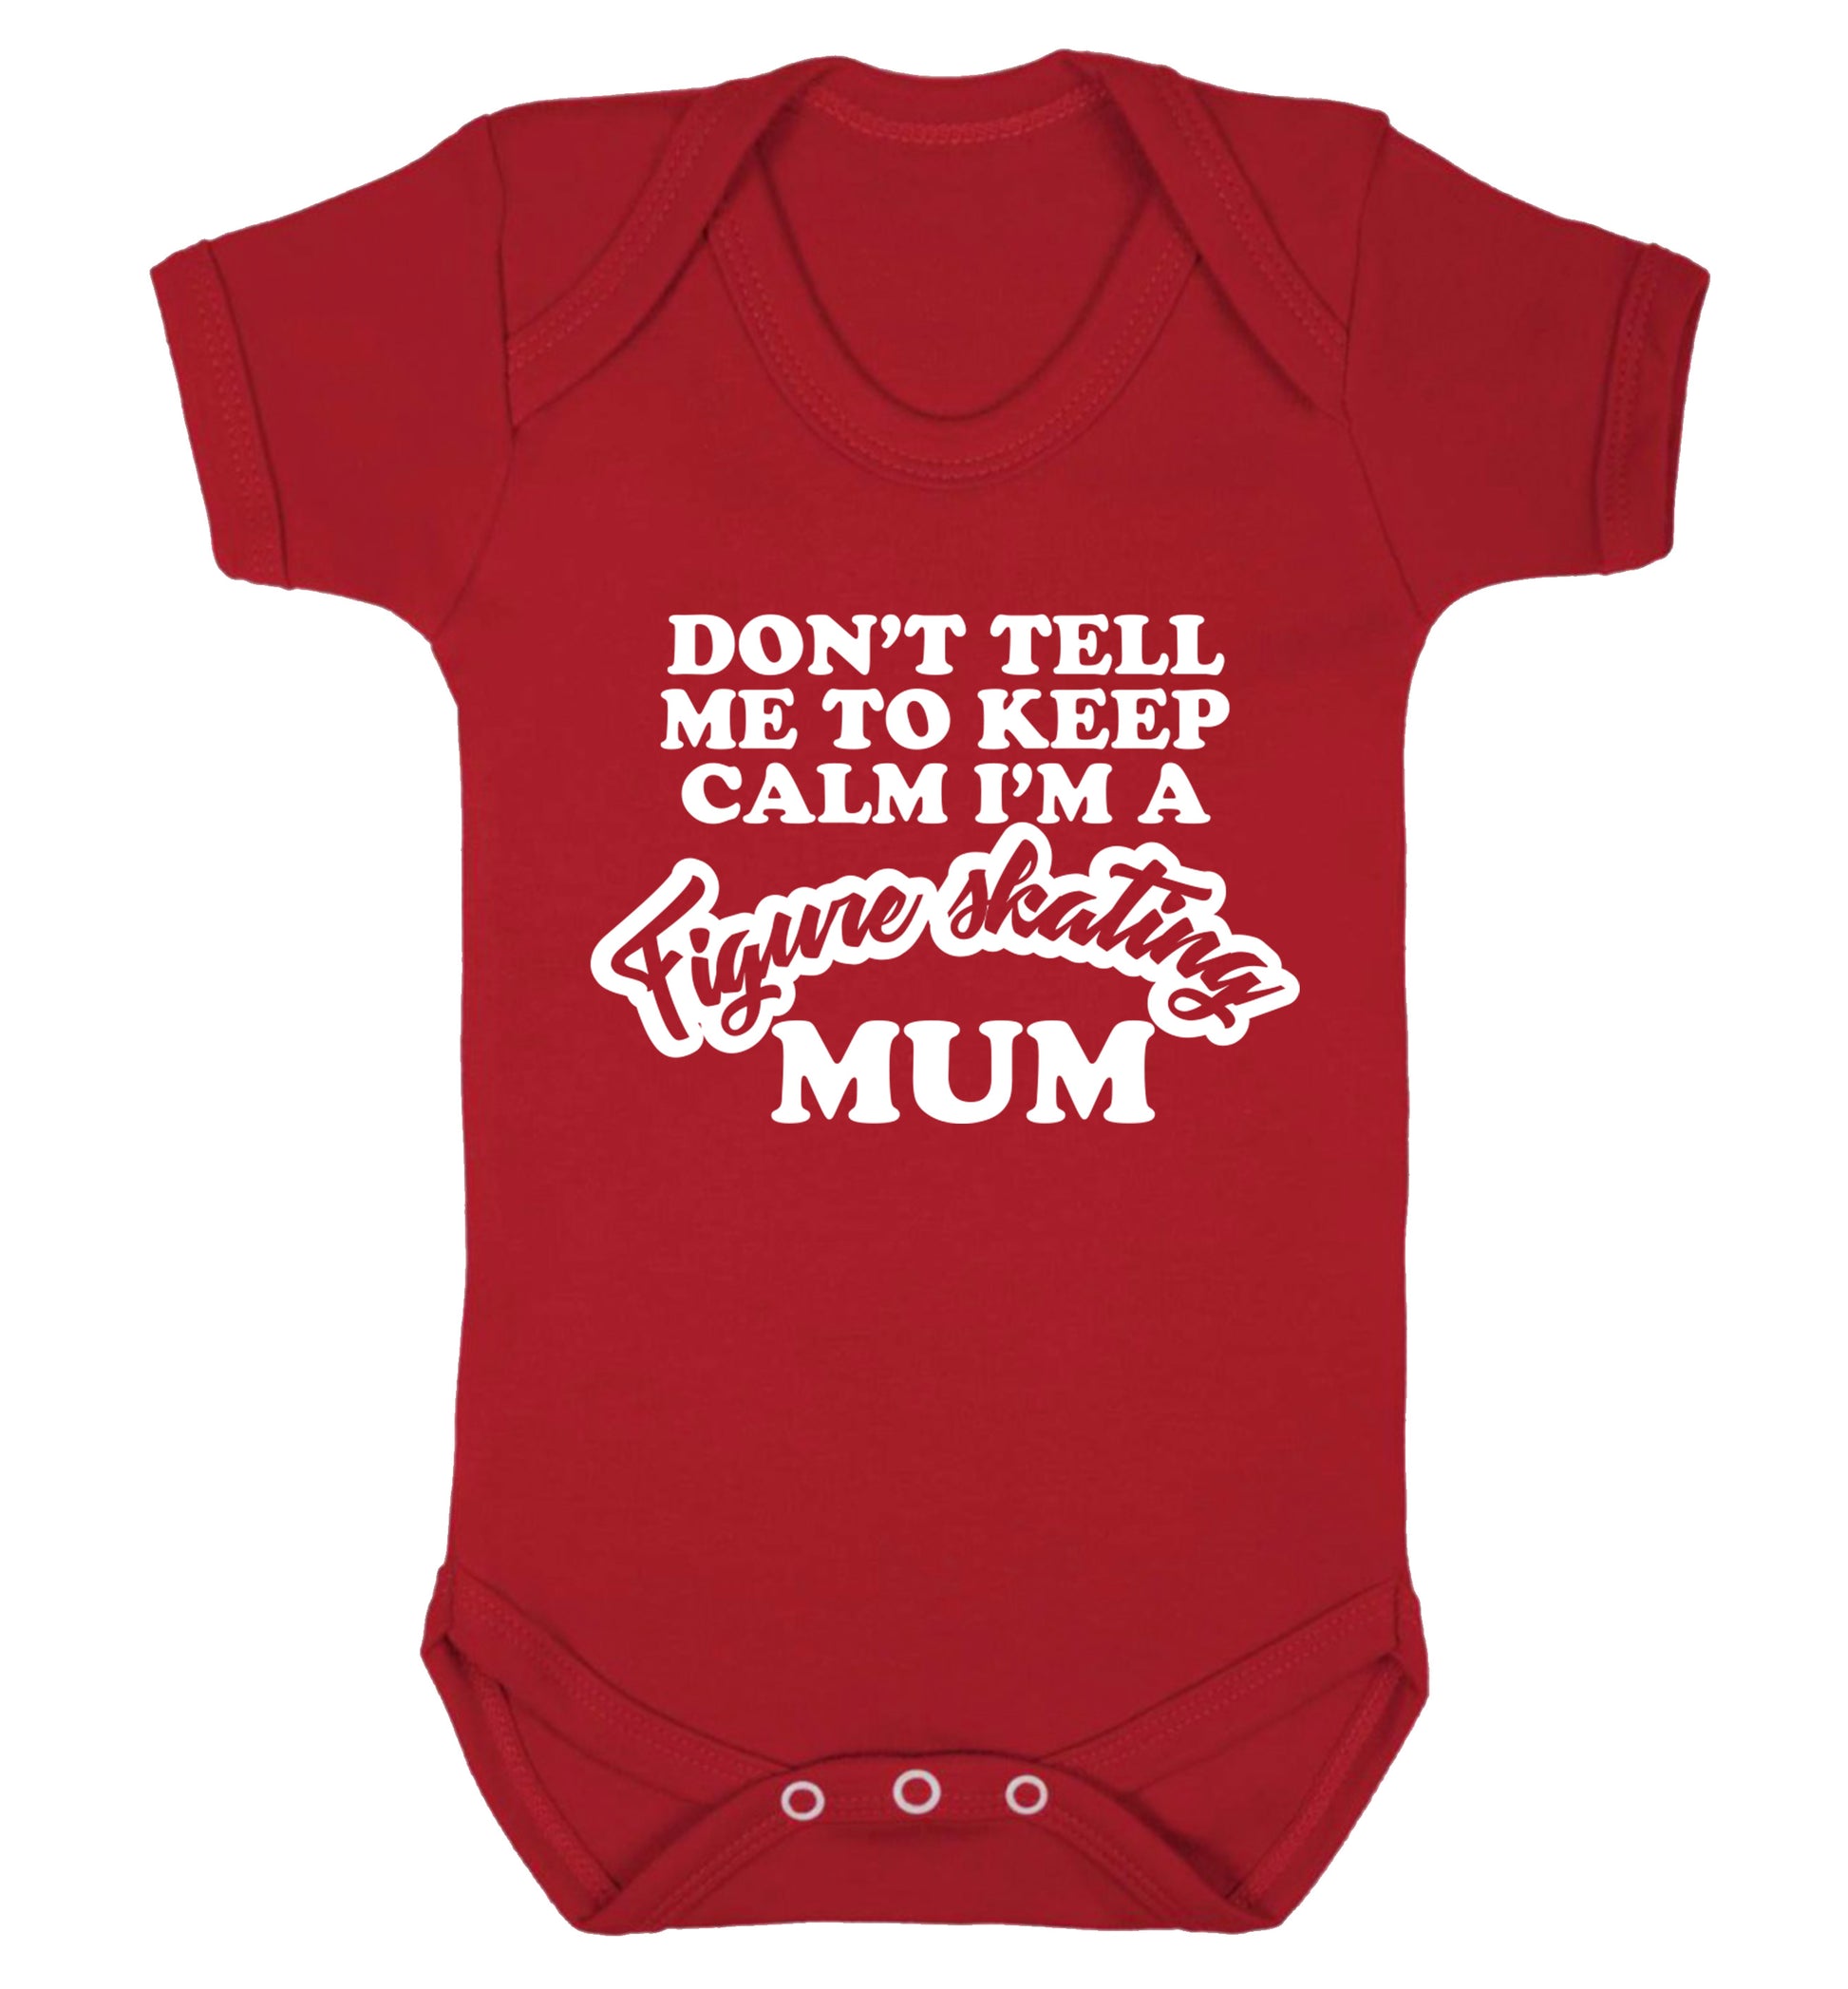 Don't tell me to keep calm I'm a figure skating mum Baby Vest red 18-24 months